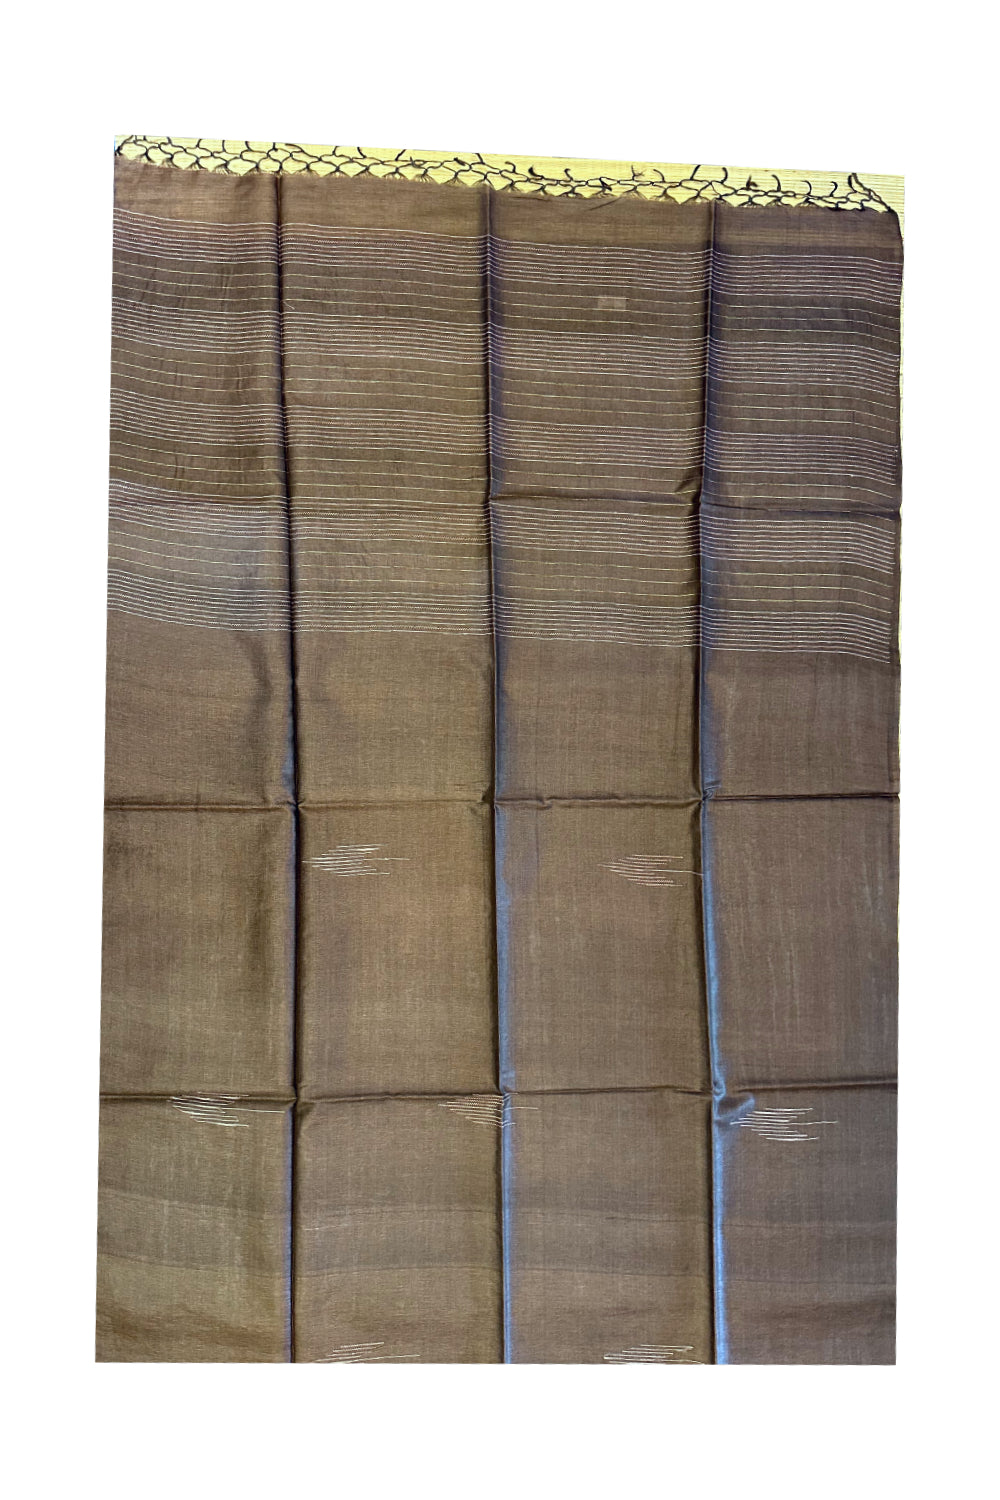 Southloom Pure Tussar Saree with Plain Body and Blouse Piece in Brown